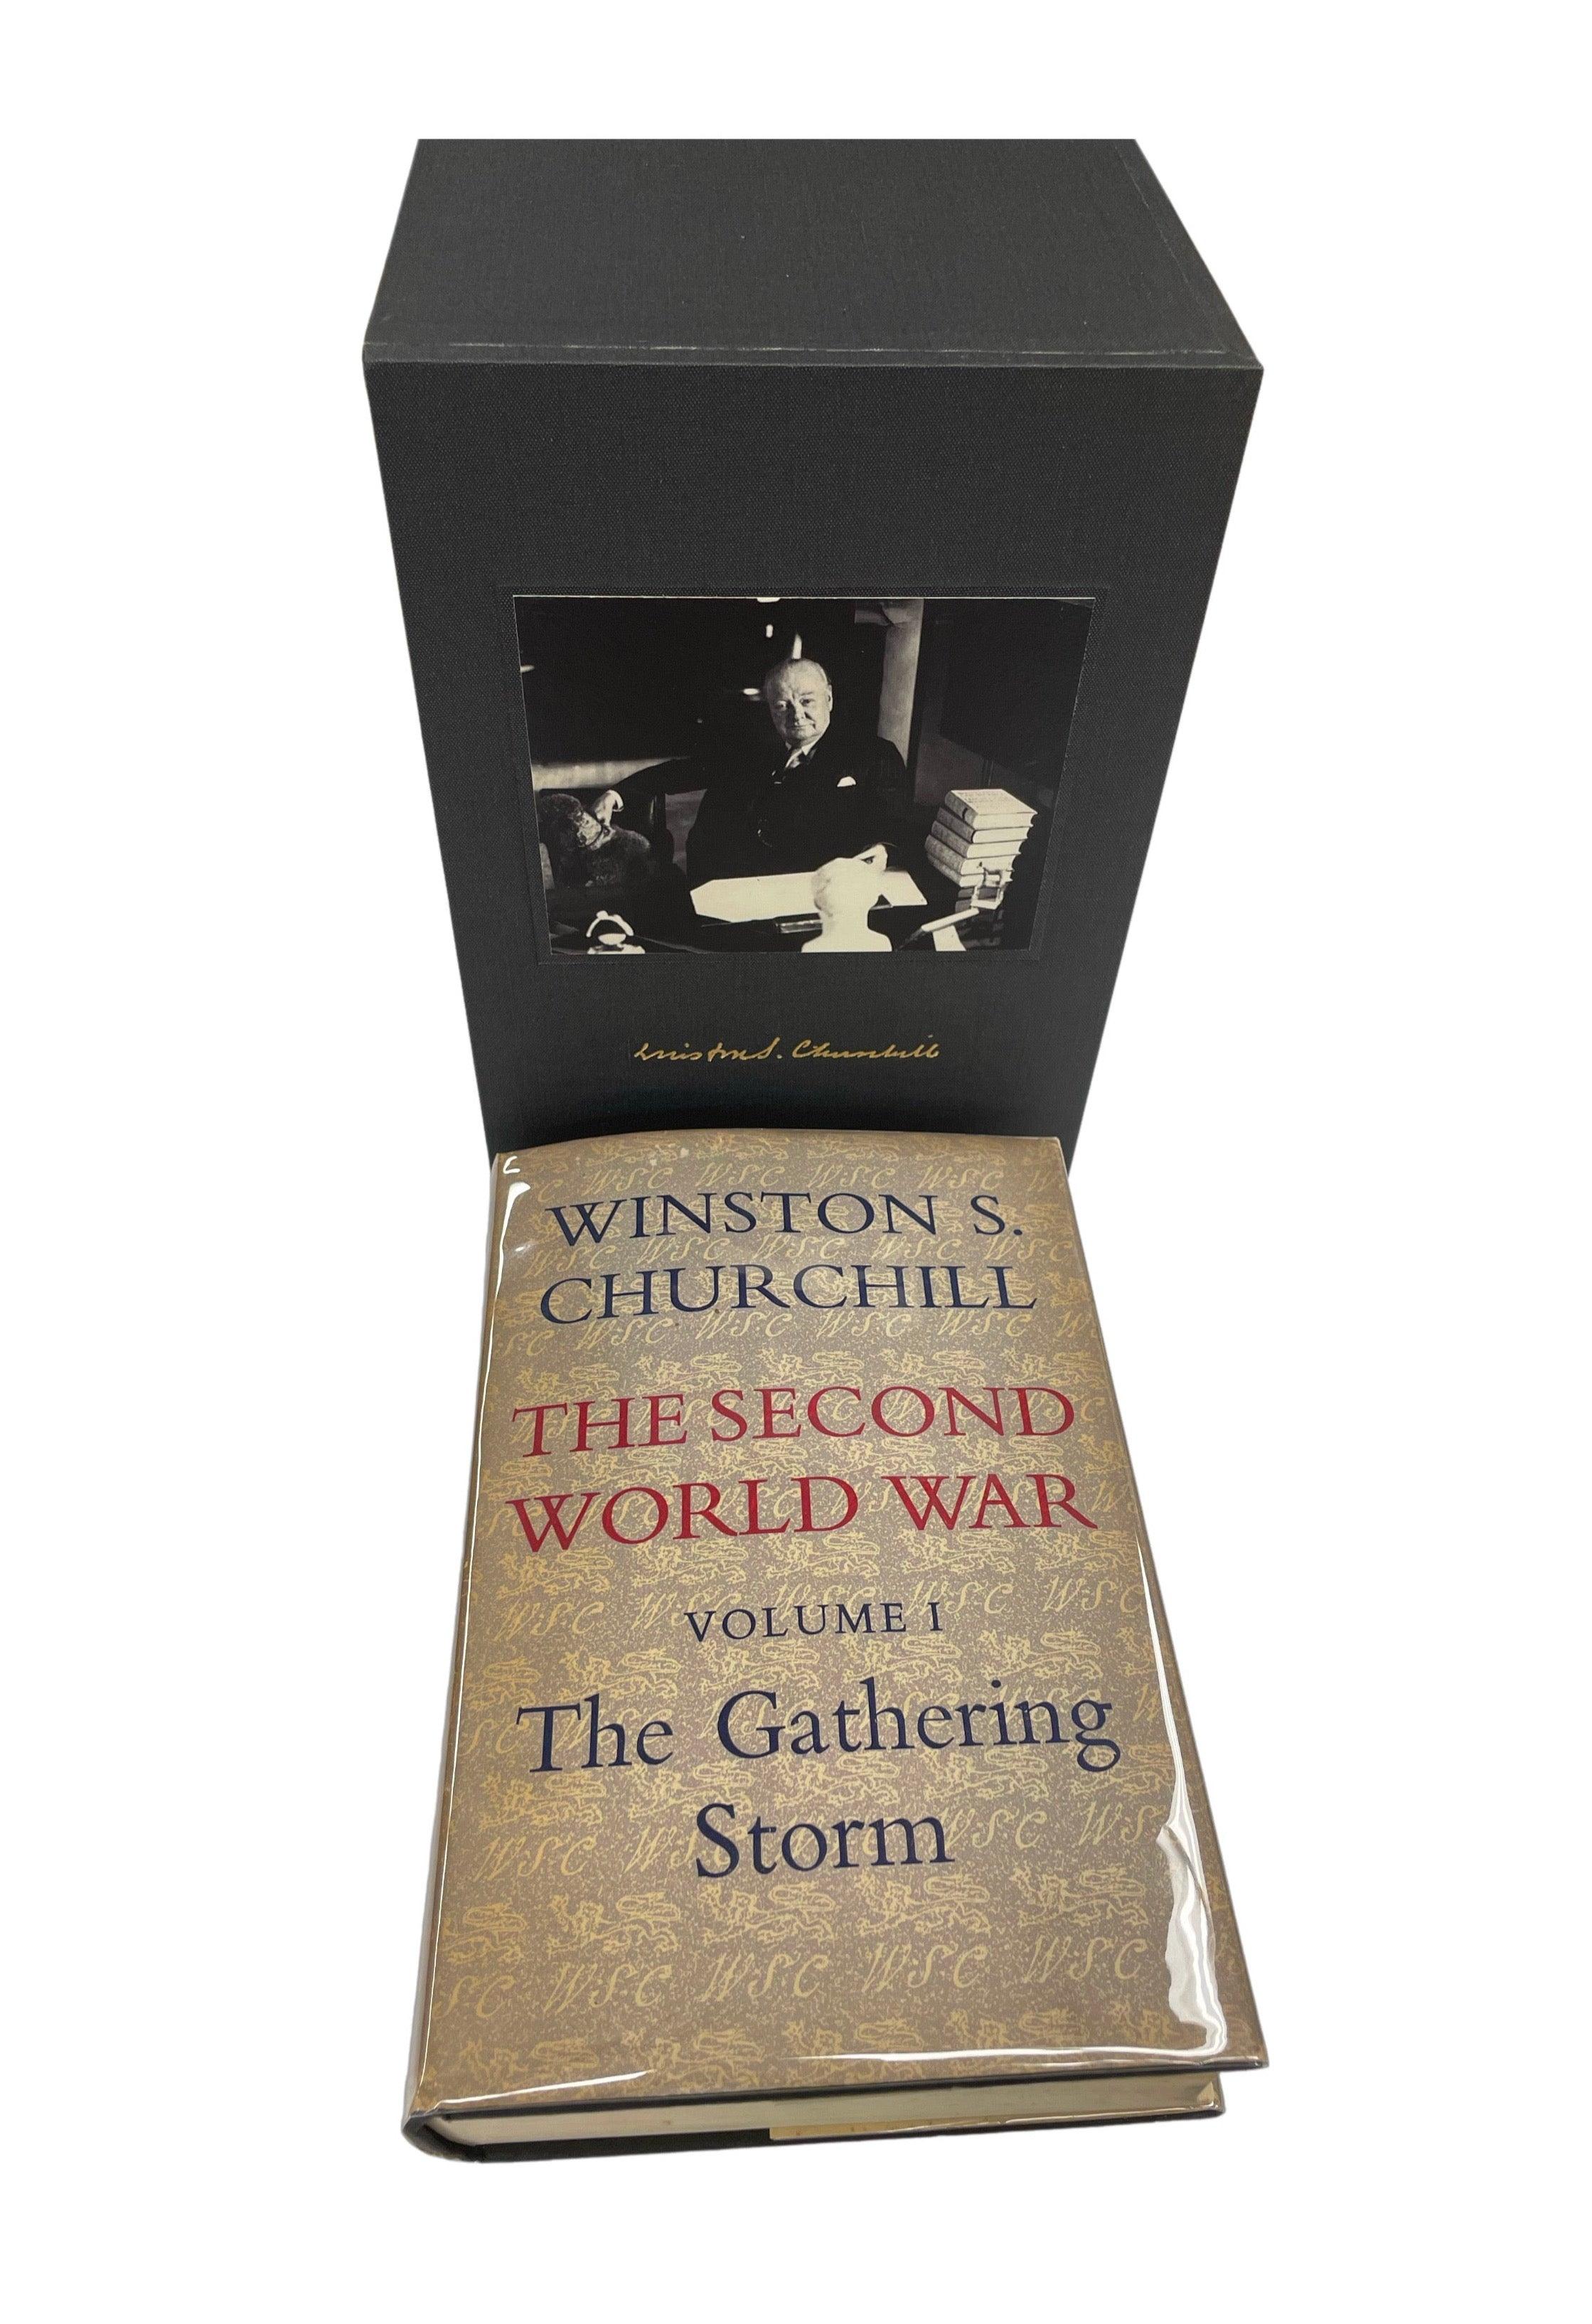 Churchill, Winston, The Second World War. London, 1948-1953: Cassell & Co. Ltd. All first editions, first issues. 6 vols. All volumes in original dust jackets and hardcover boards with a new custom cloth slipcase.

Presented is a first edition set